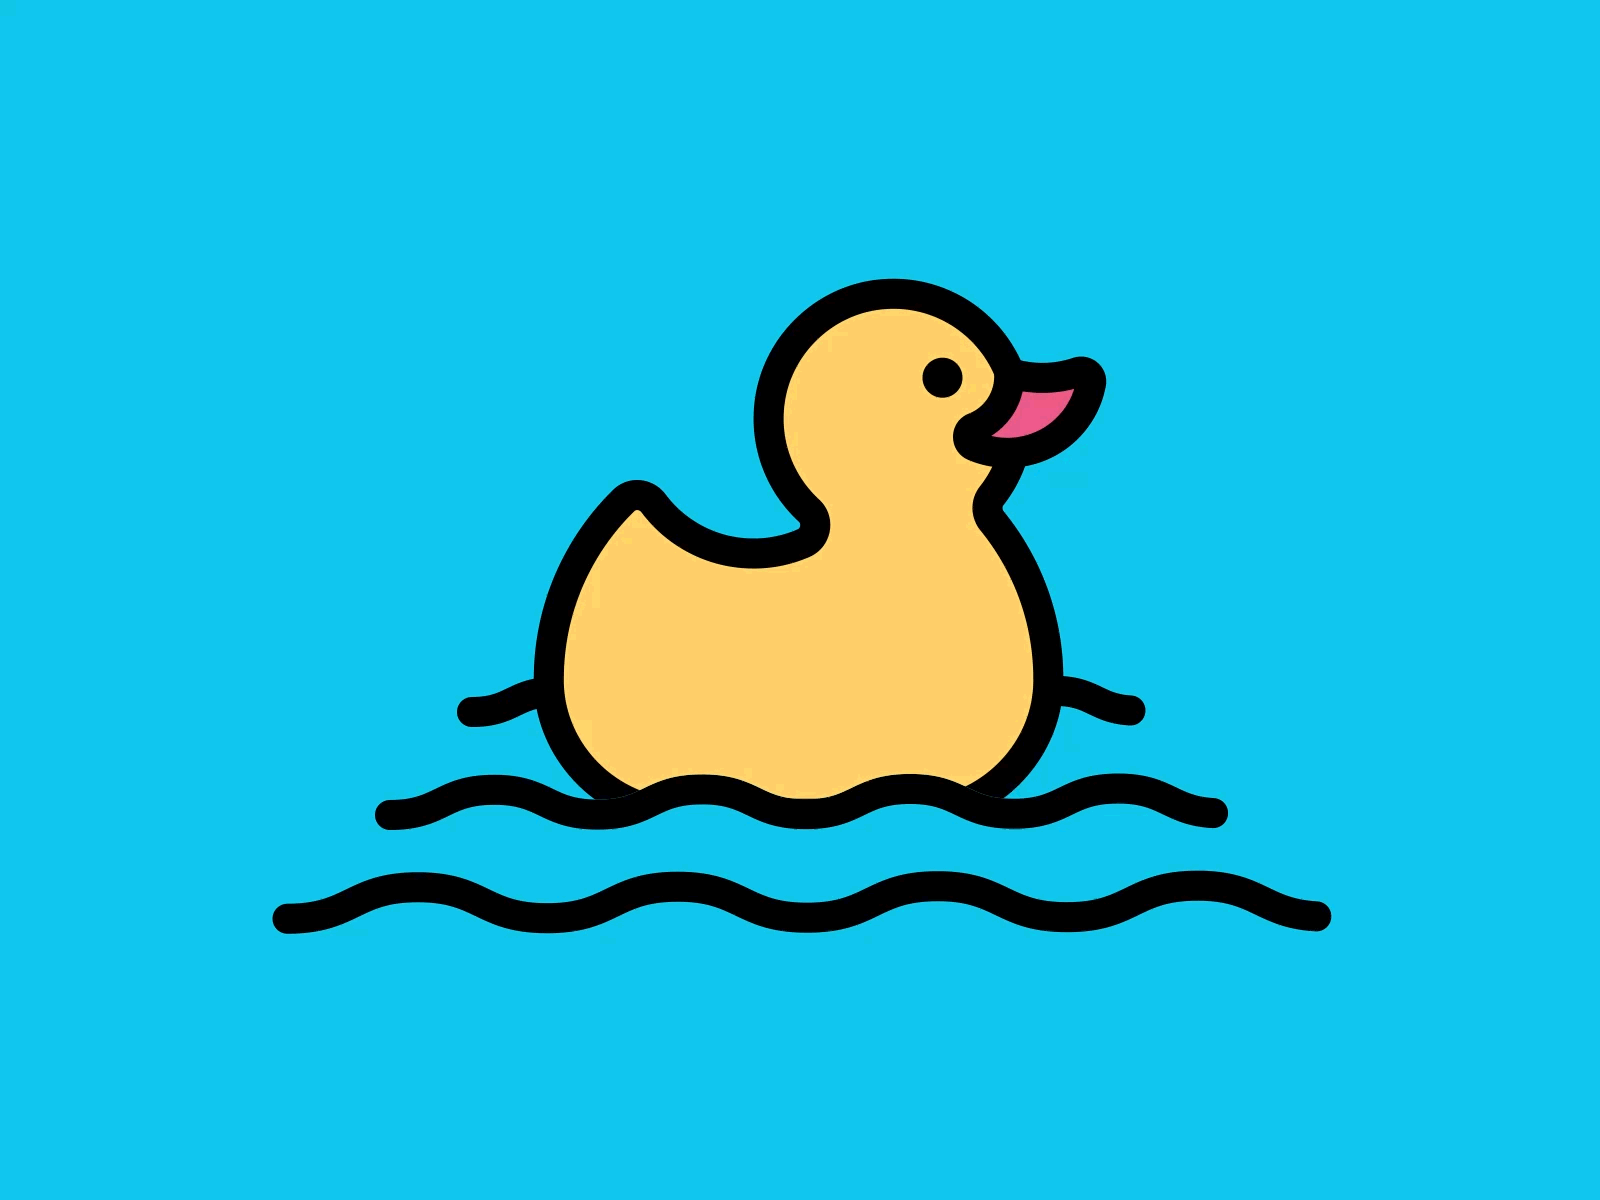 Rubber duck floating on water